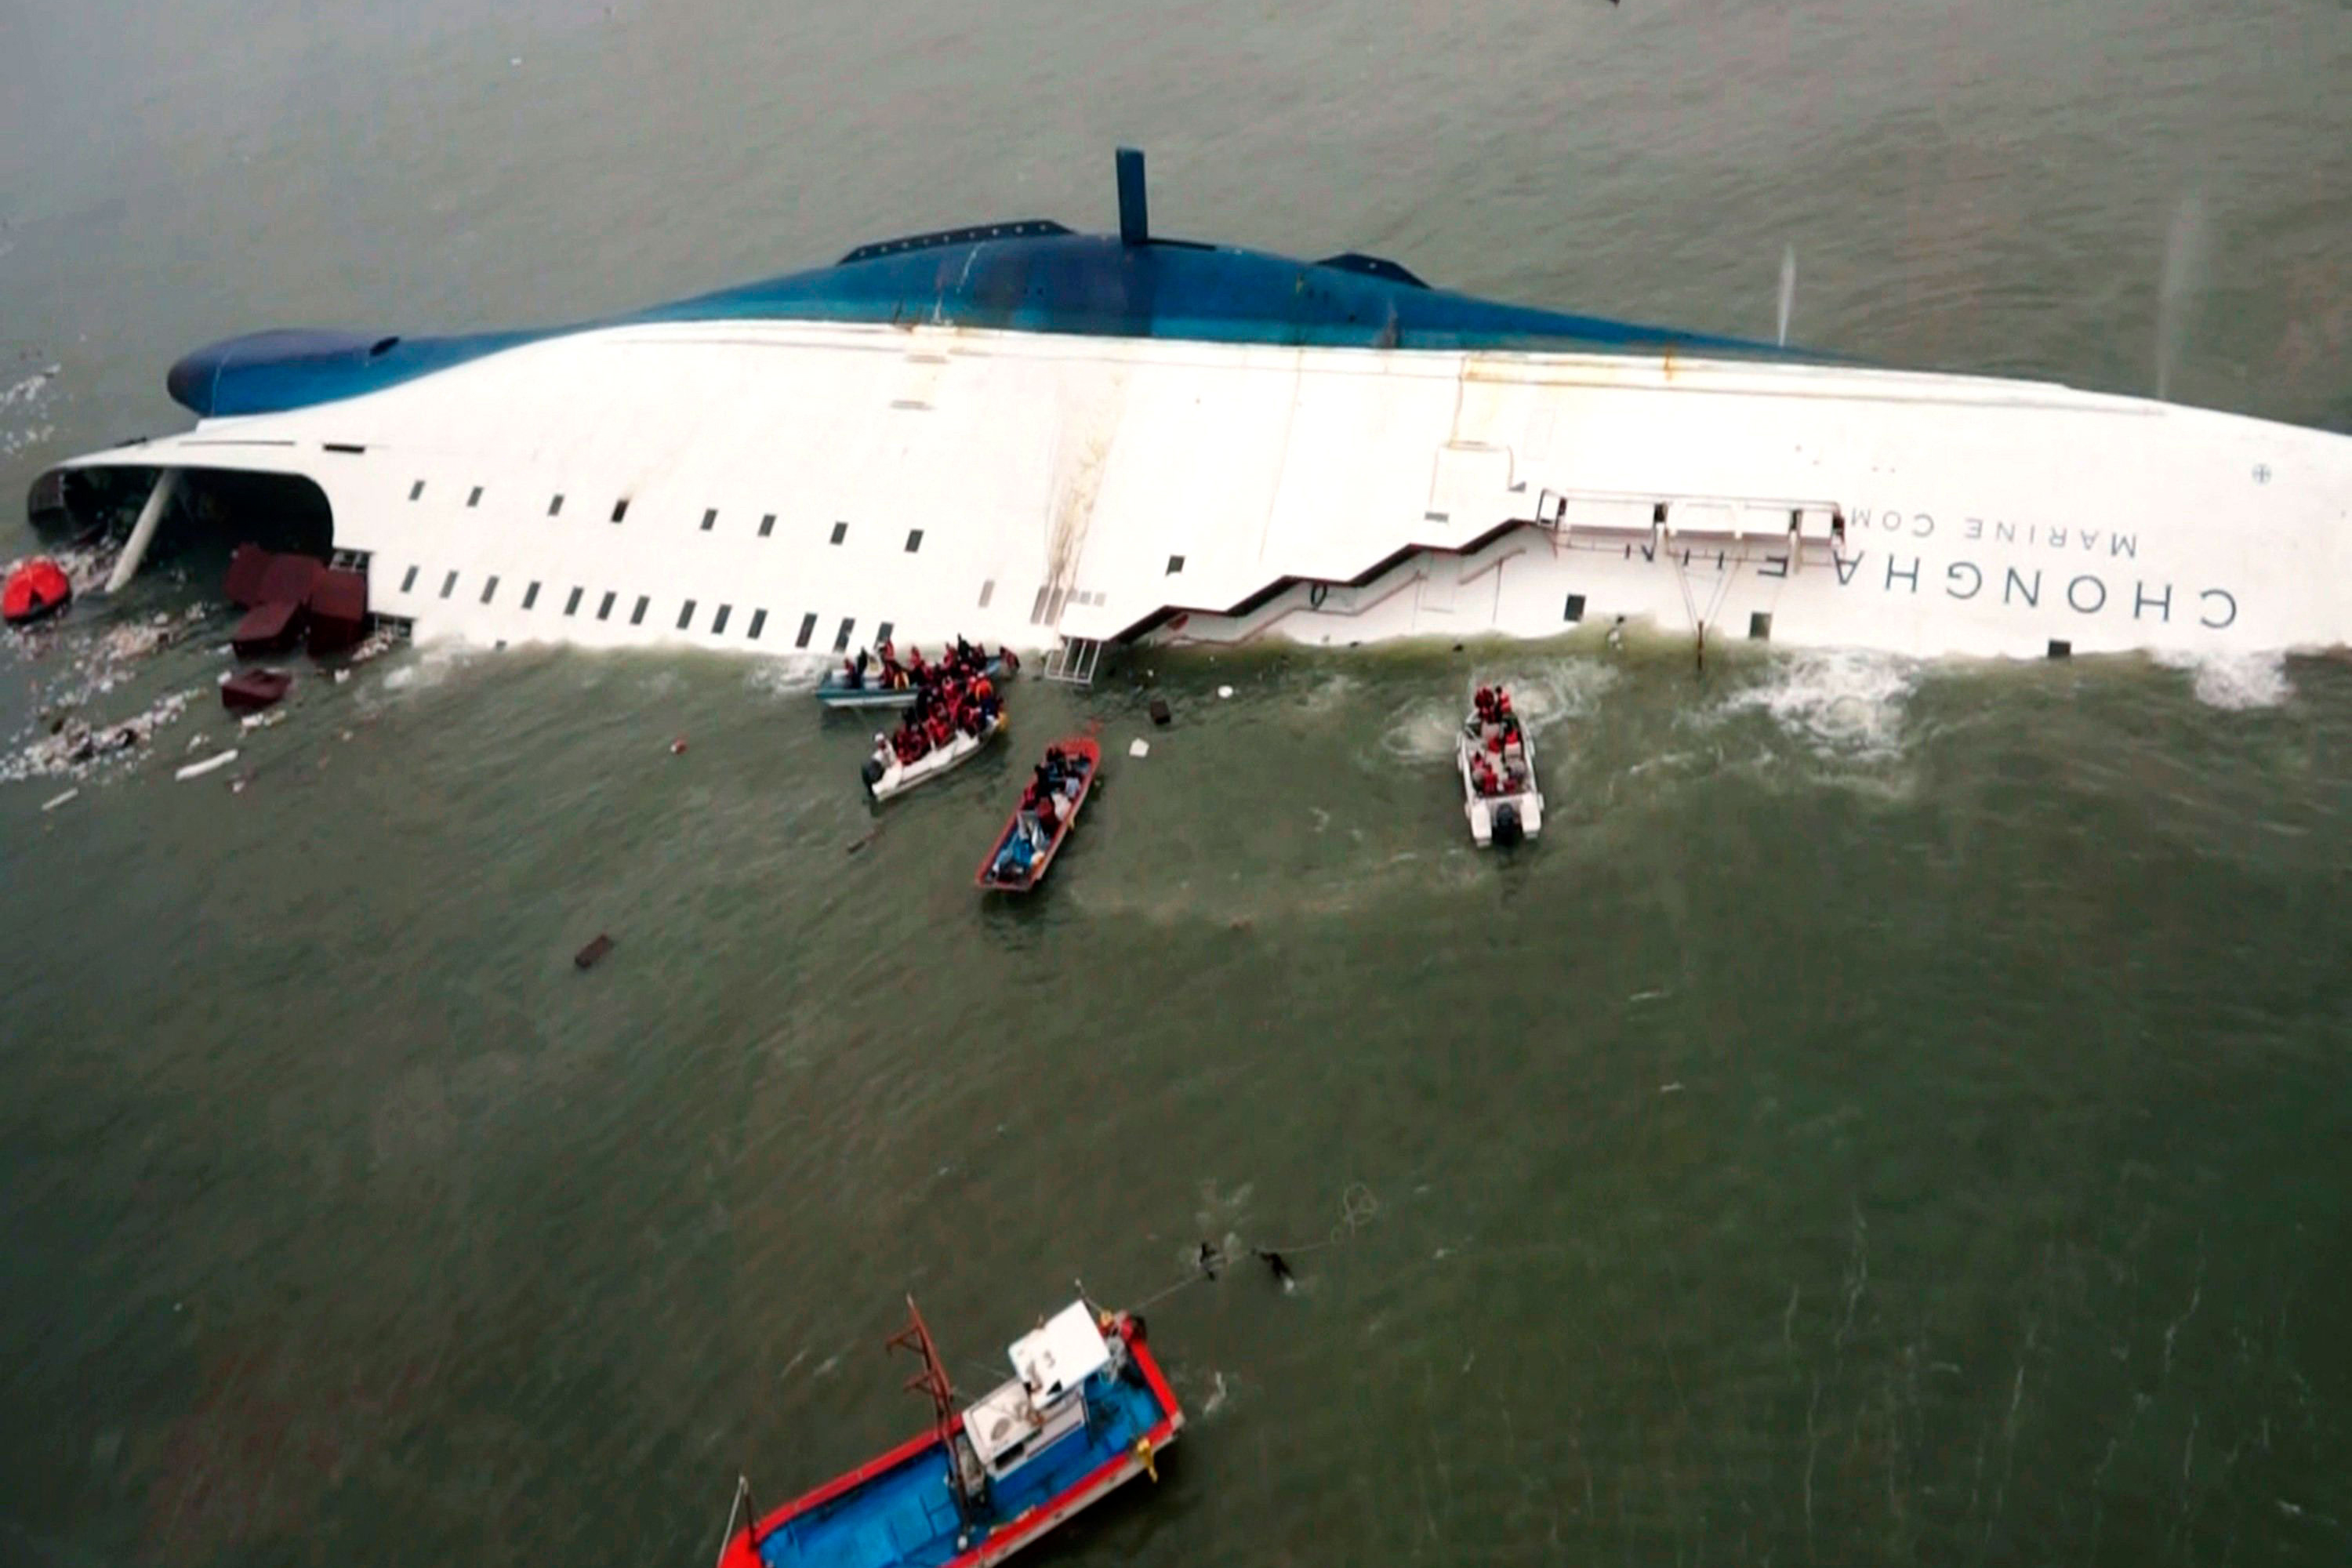 South Korean ferry Sewol is seen sinking in the sea off Jindo April 16, 2014.